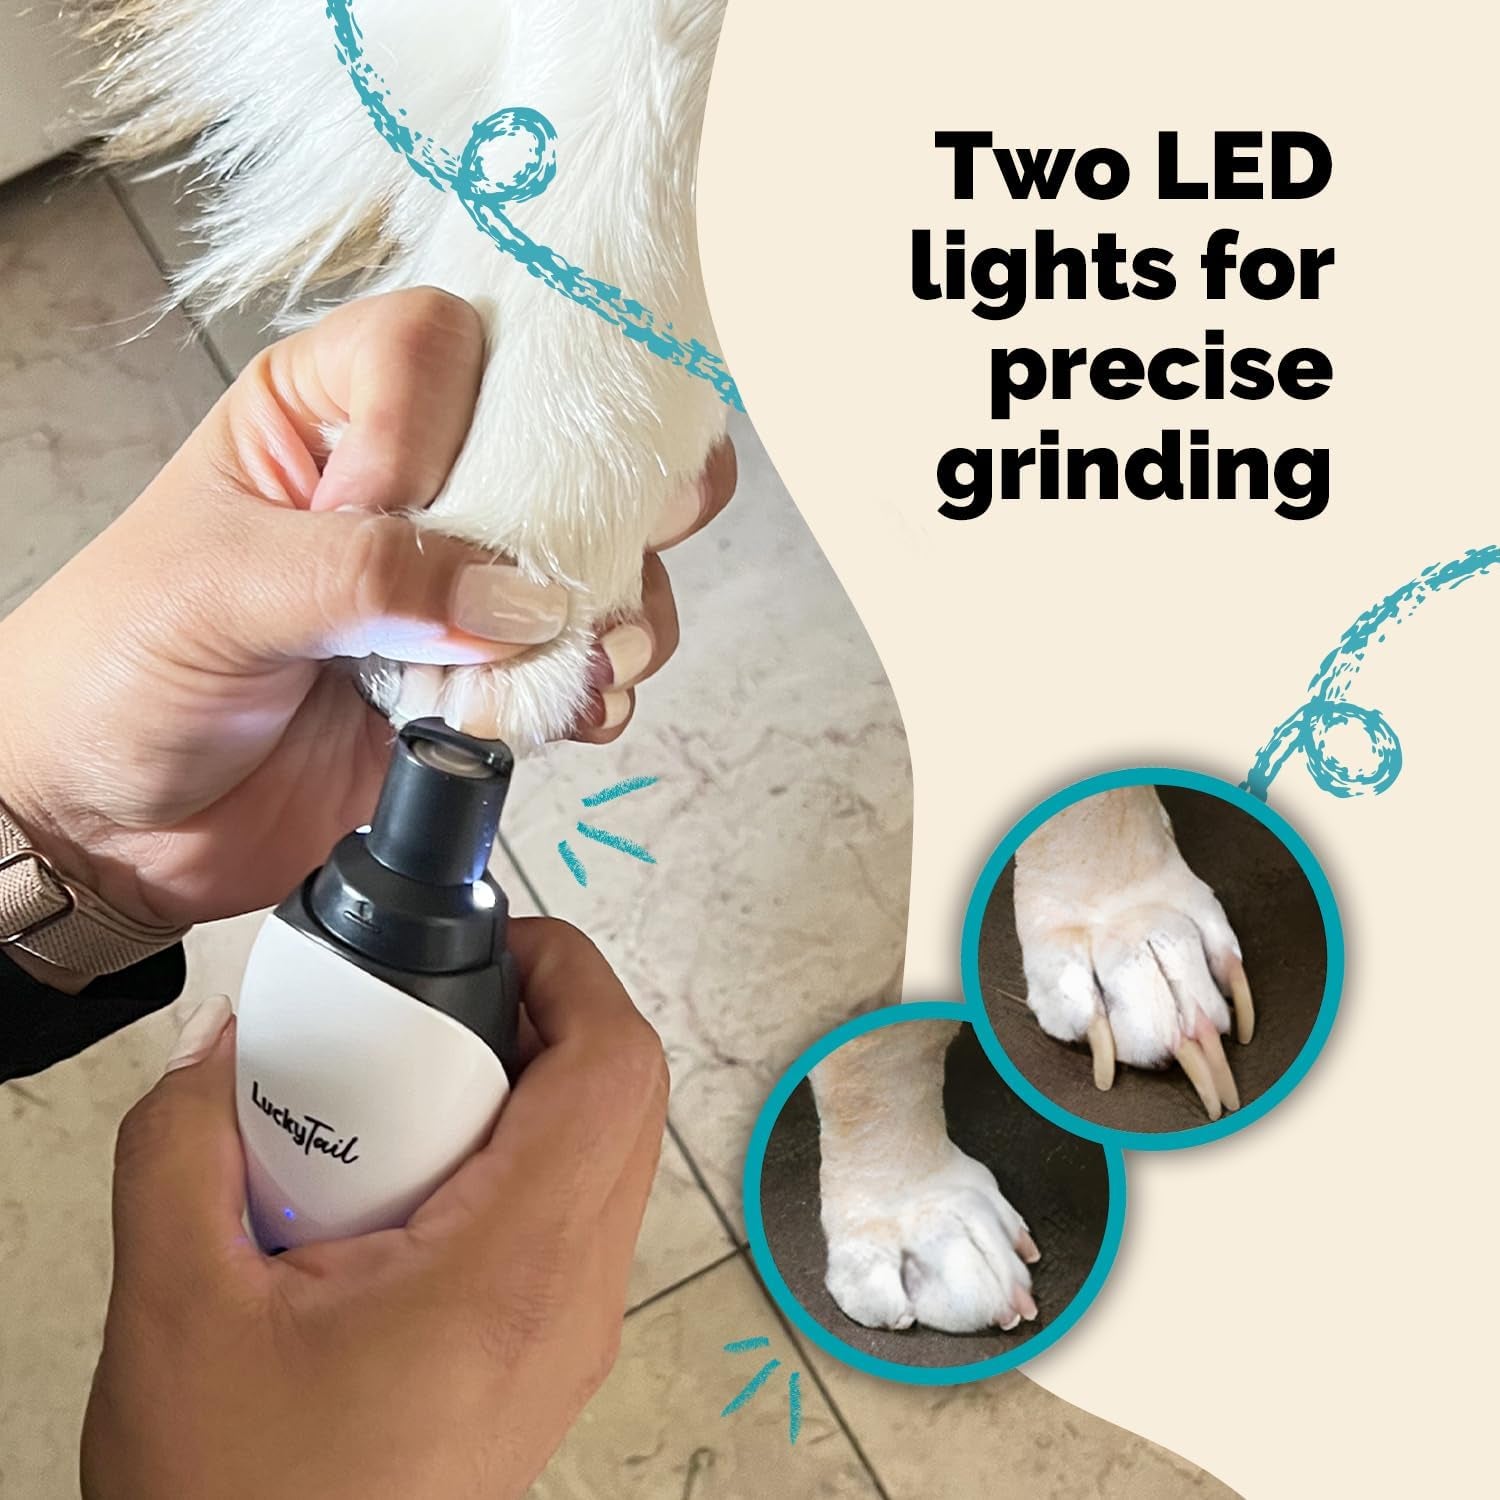 Luckytail Pet Nail Grinder for Dogs and Cats - Super Quiet and Low Vibration Electric Dog Nail Grinder with 2 LED Lights - USB Rechargeable and Cordless - 2 Speeds - Small to Large Pets